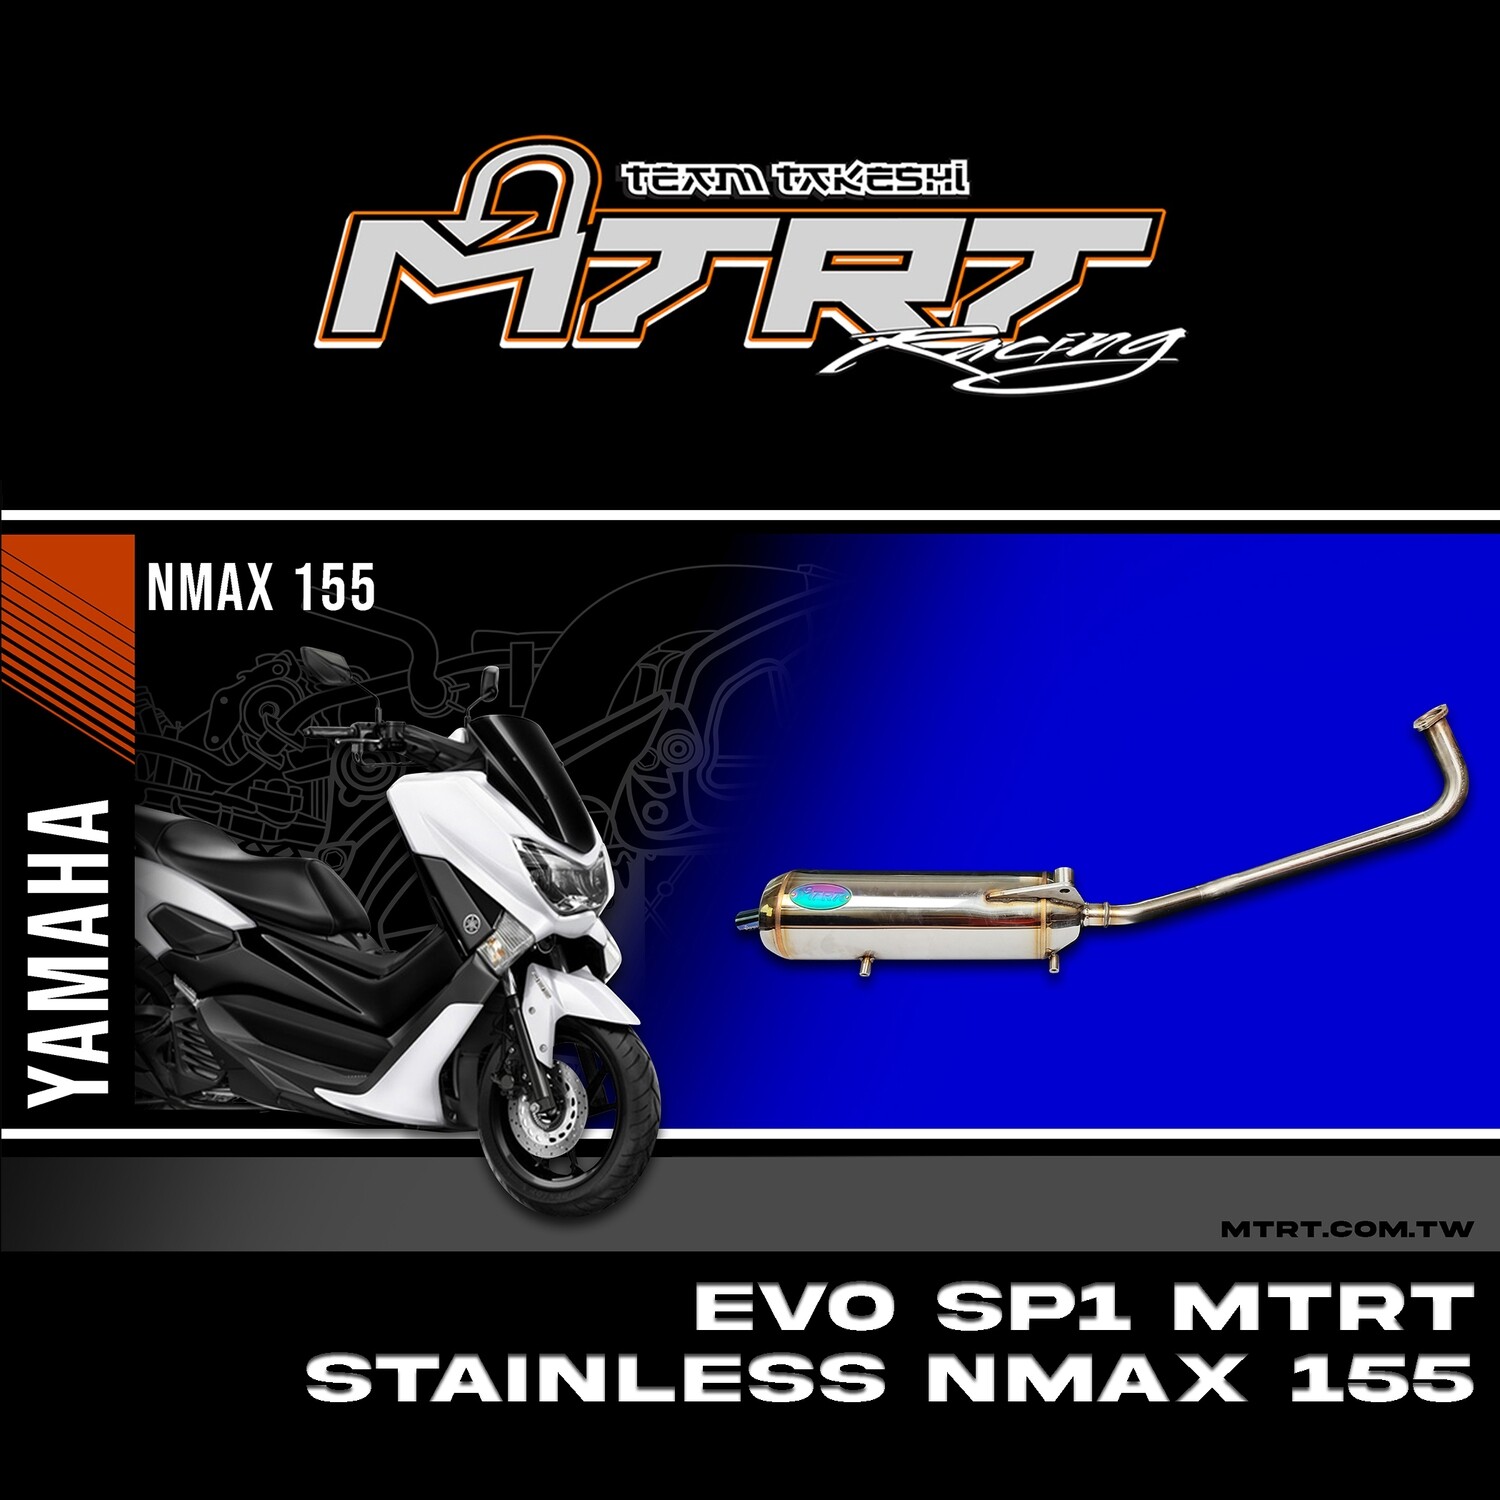 PIPE EVO-SP1 NMAX155  STAINLESS MTRT SILENT POWER (TAIWAN)